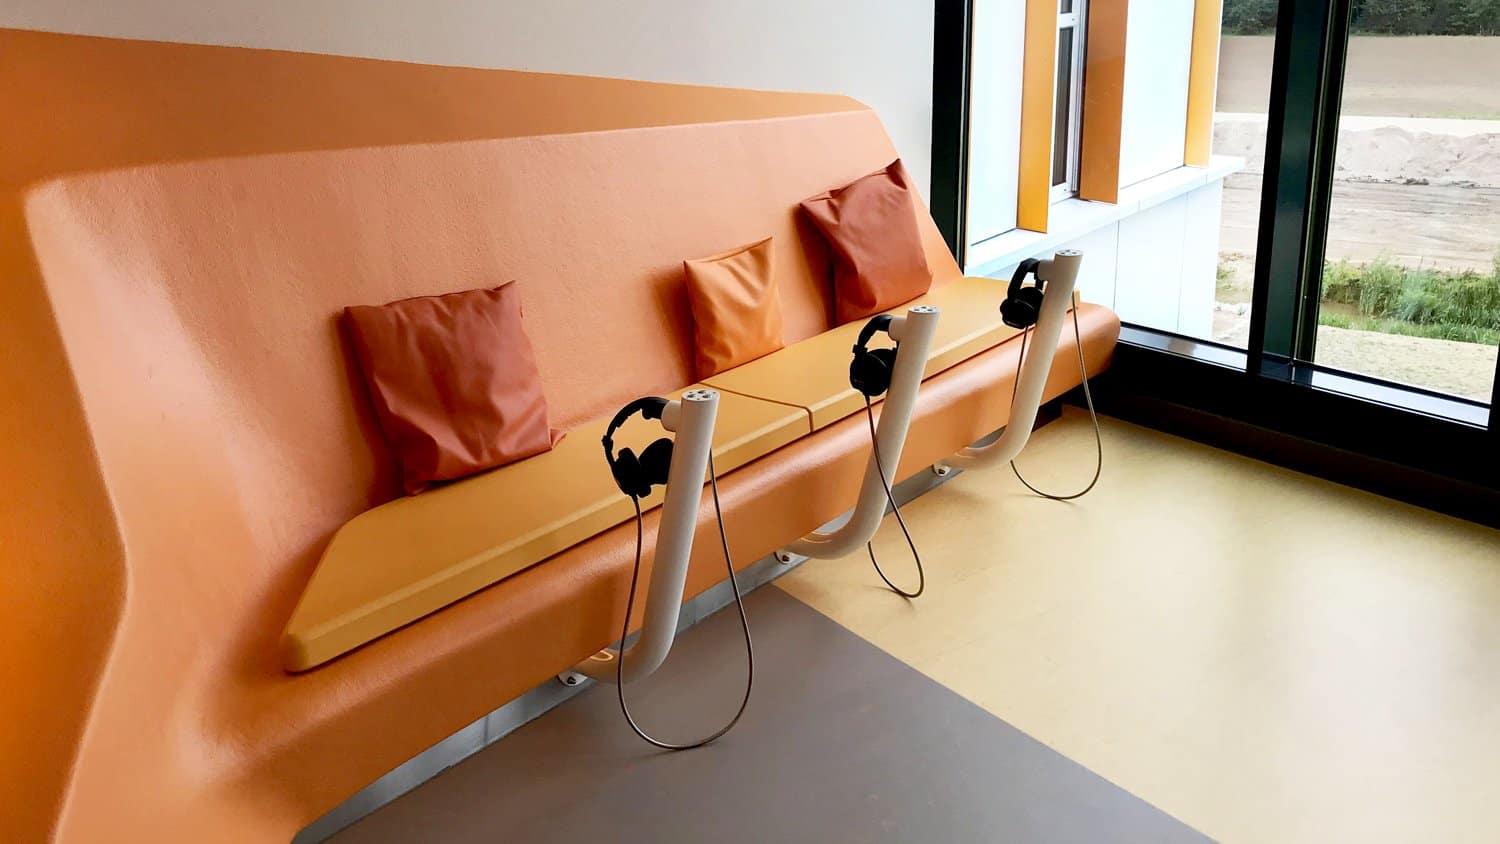 Auto Play Double Cup Headphones installed in the Pediatric Oncology Hospital